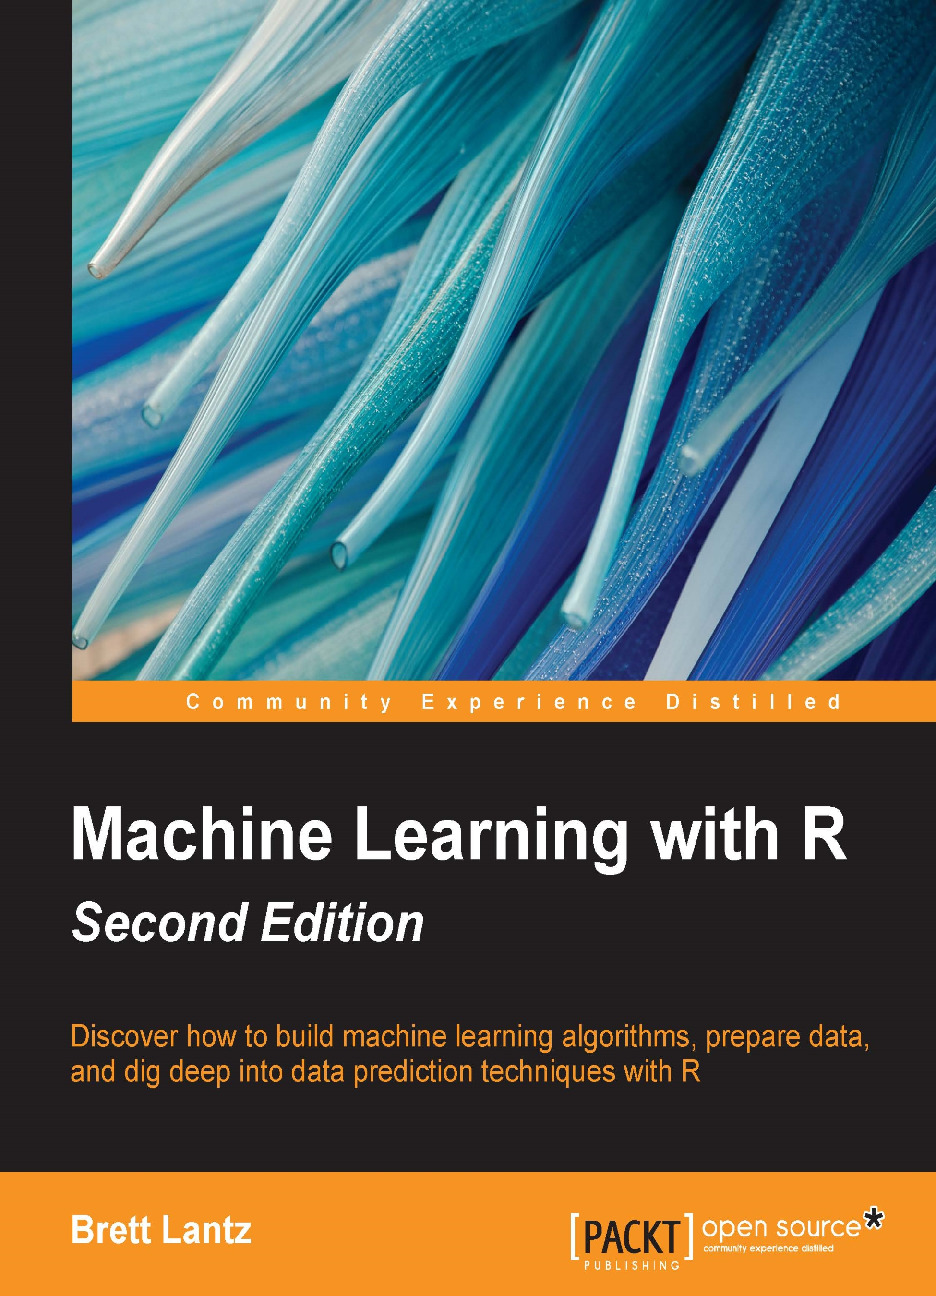 Machine learning with R _ discover how to build machine learning algorithms, prepare data, and dig deep into data prediction techniques with R